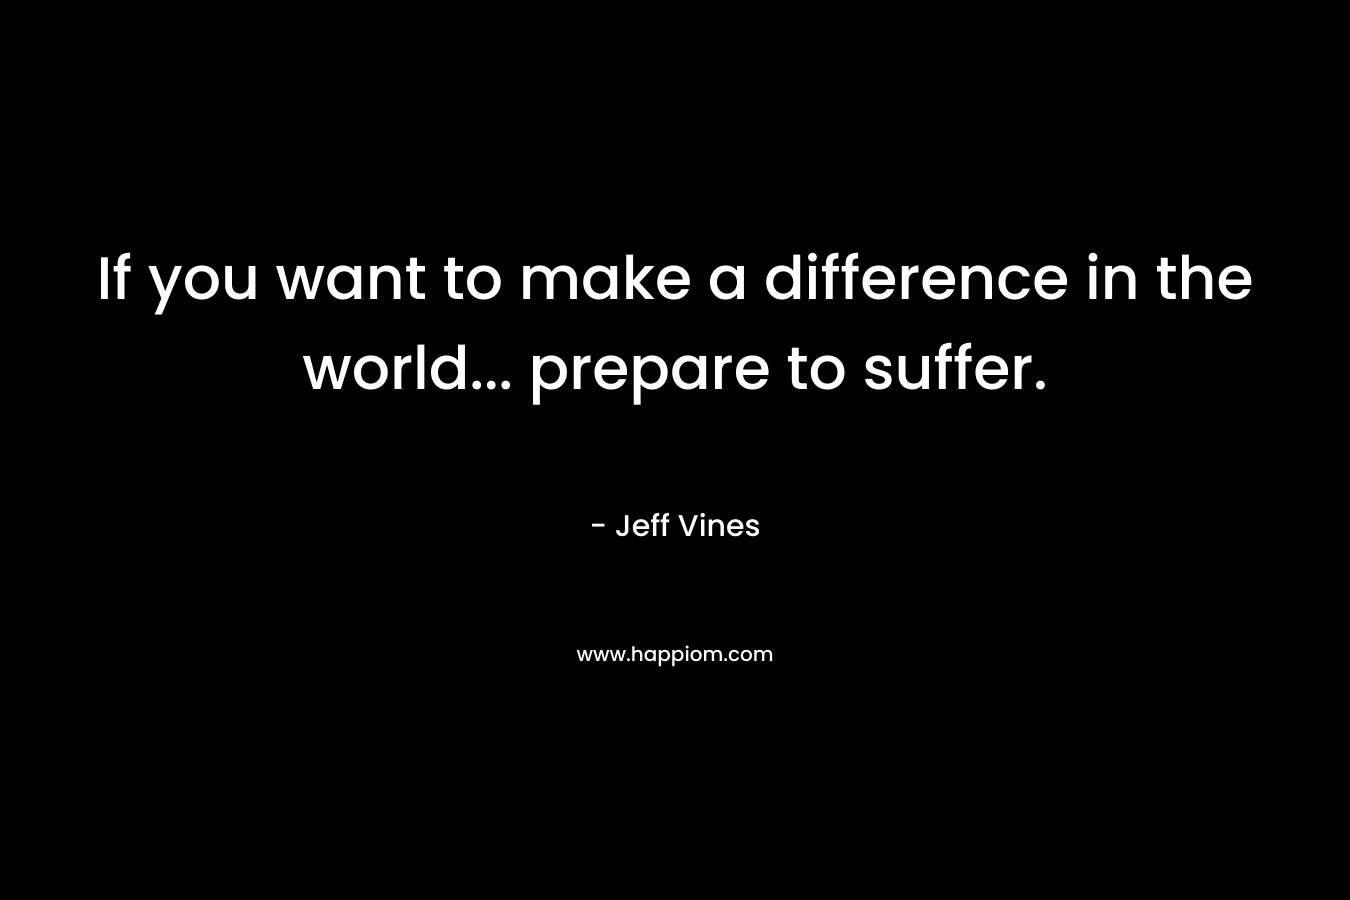 If you want to make a difference in the world... prepare to suffer.